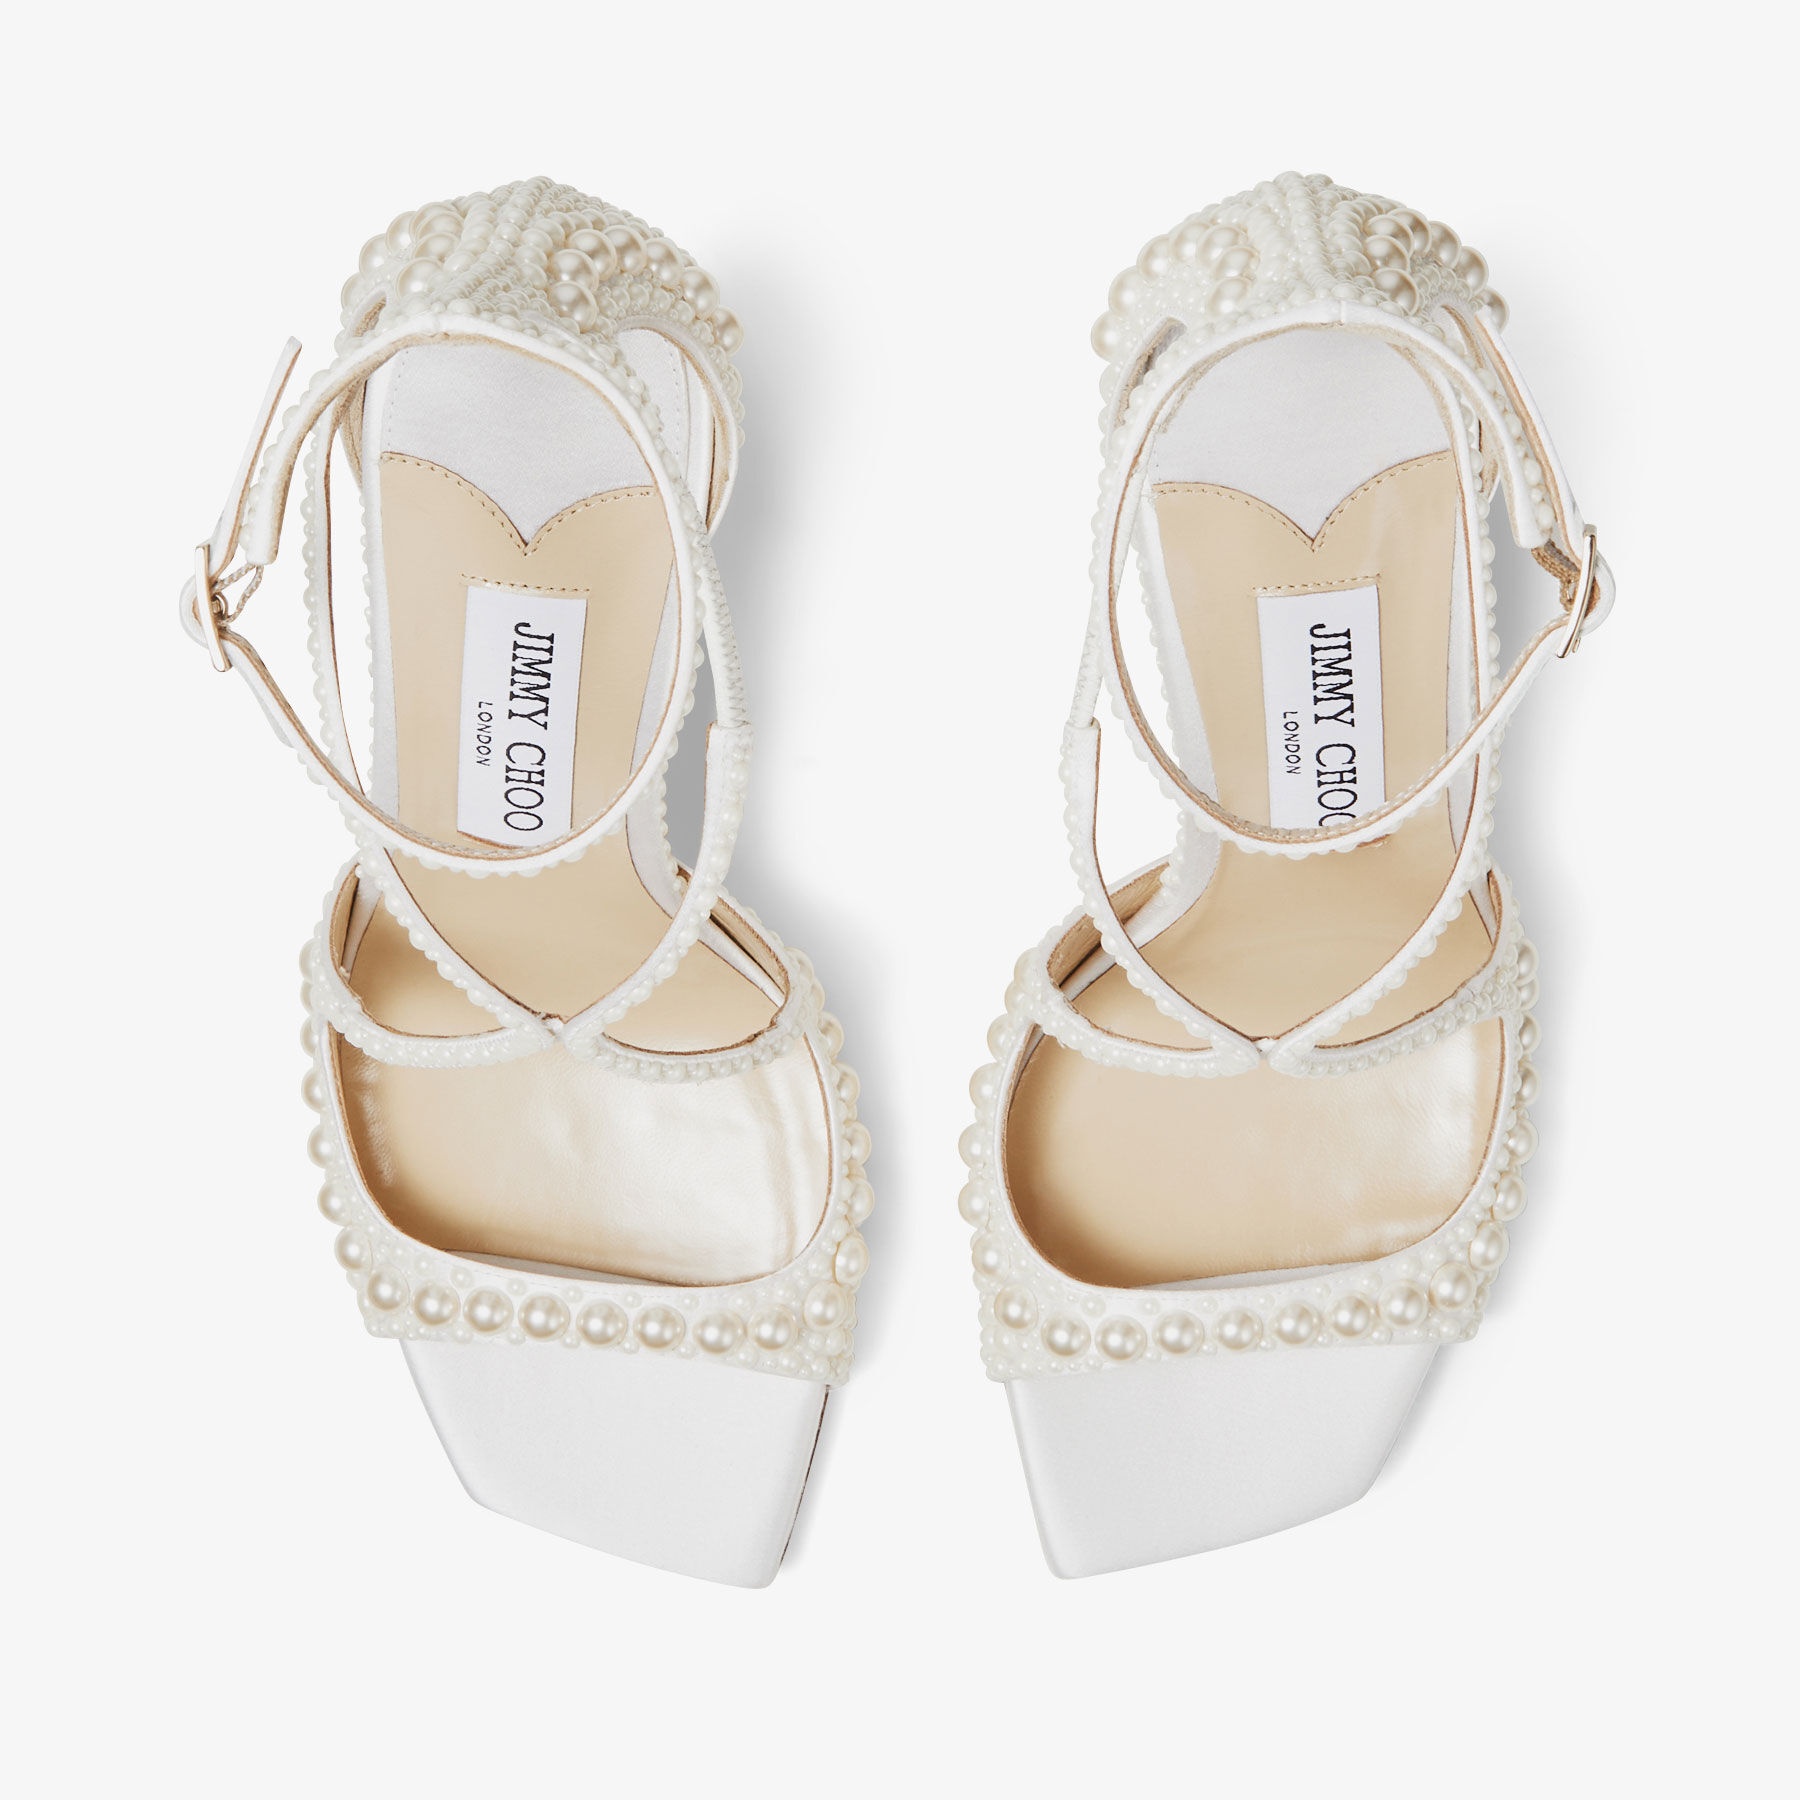 Azia 95
White Satin Sandals with All-Over Pearls - 4